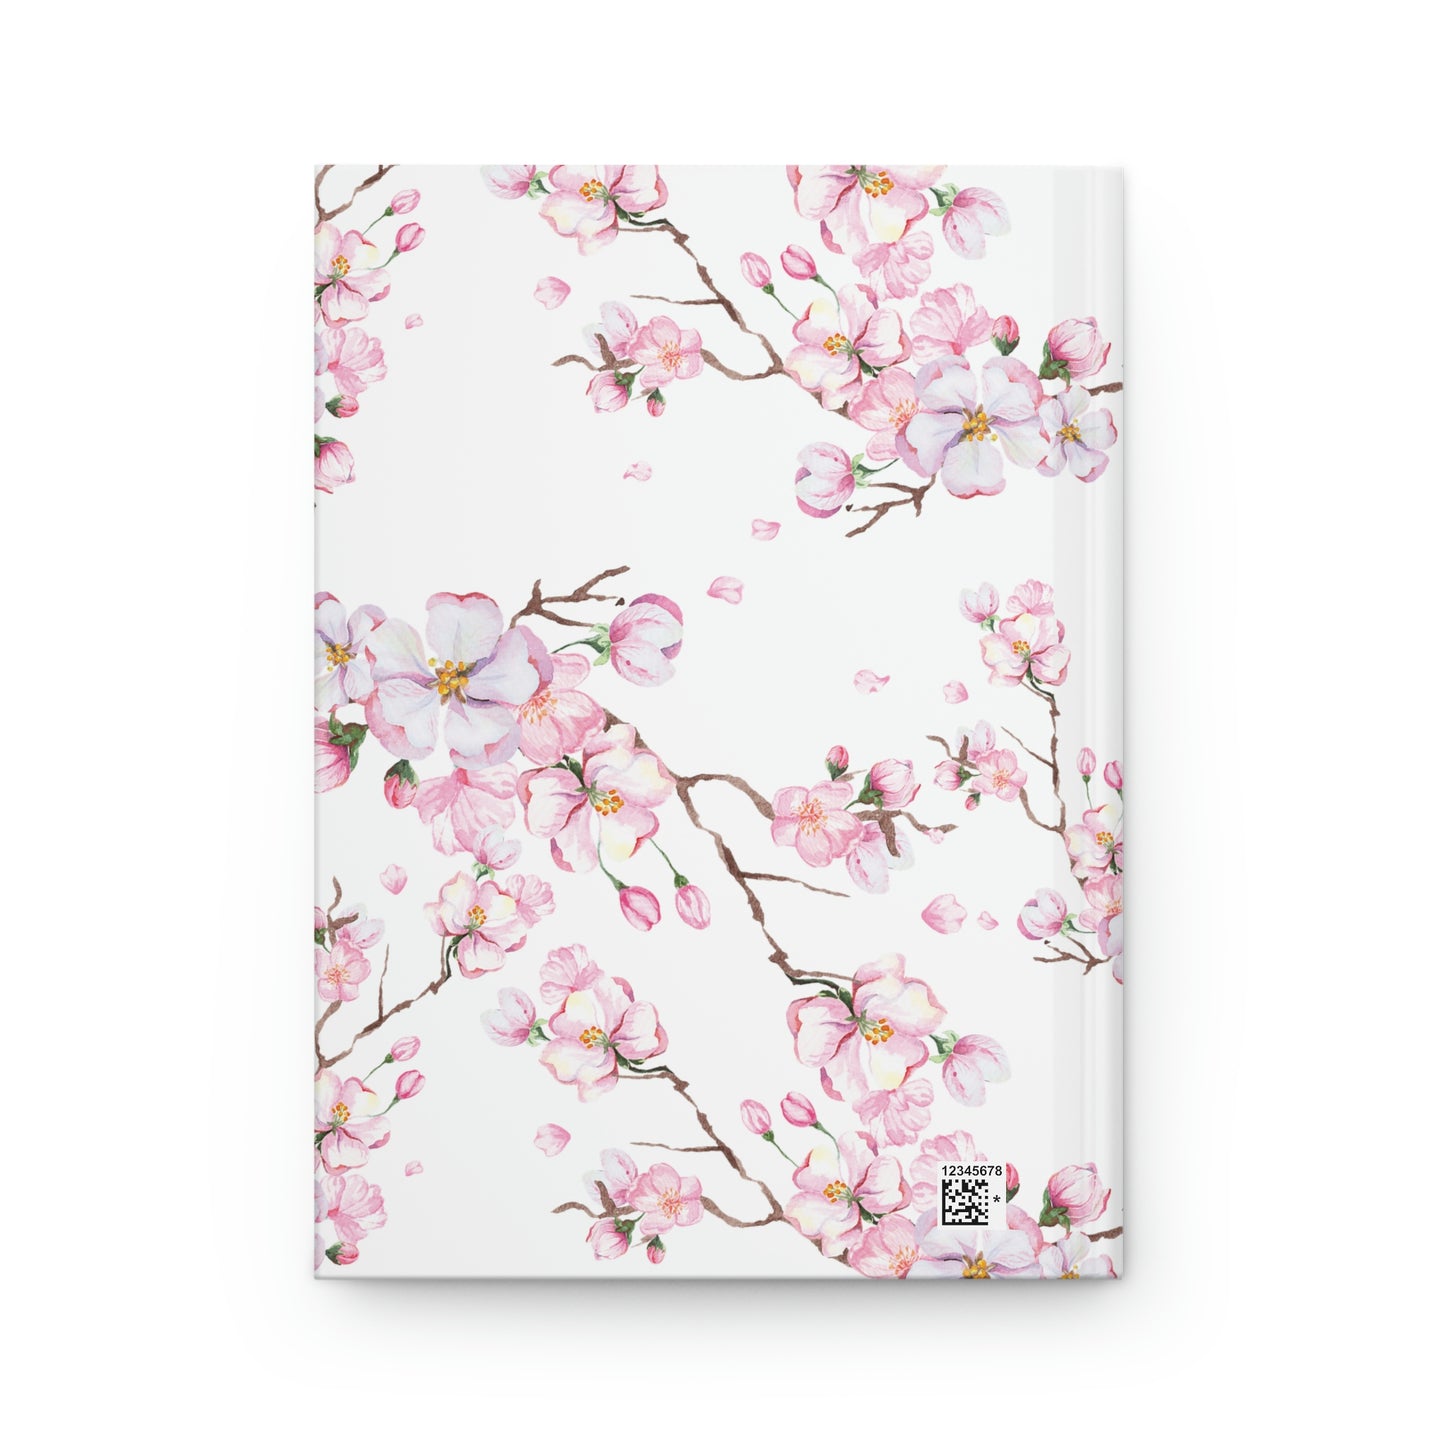 Personalized Name Cherry Blossom Journal